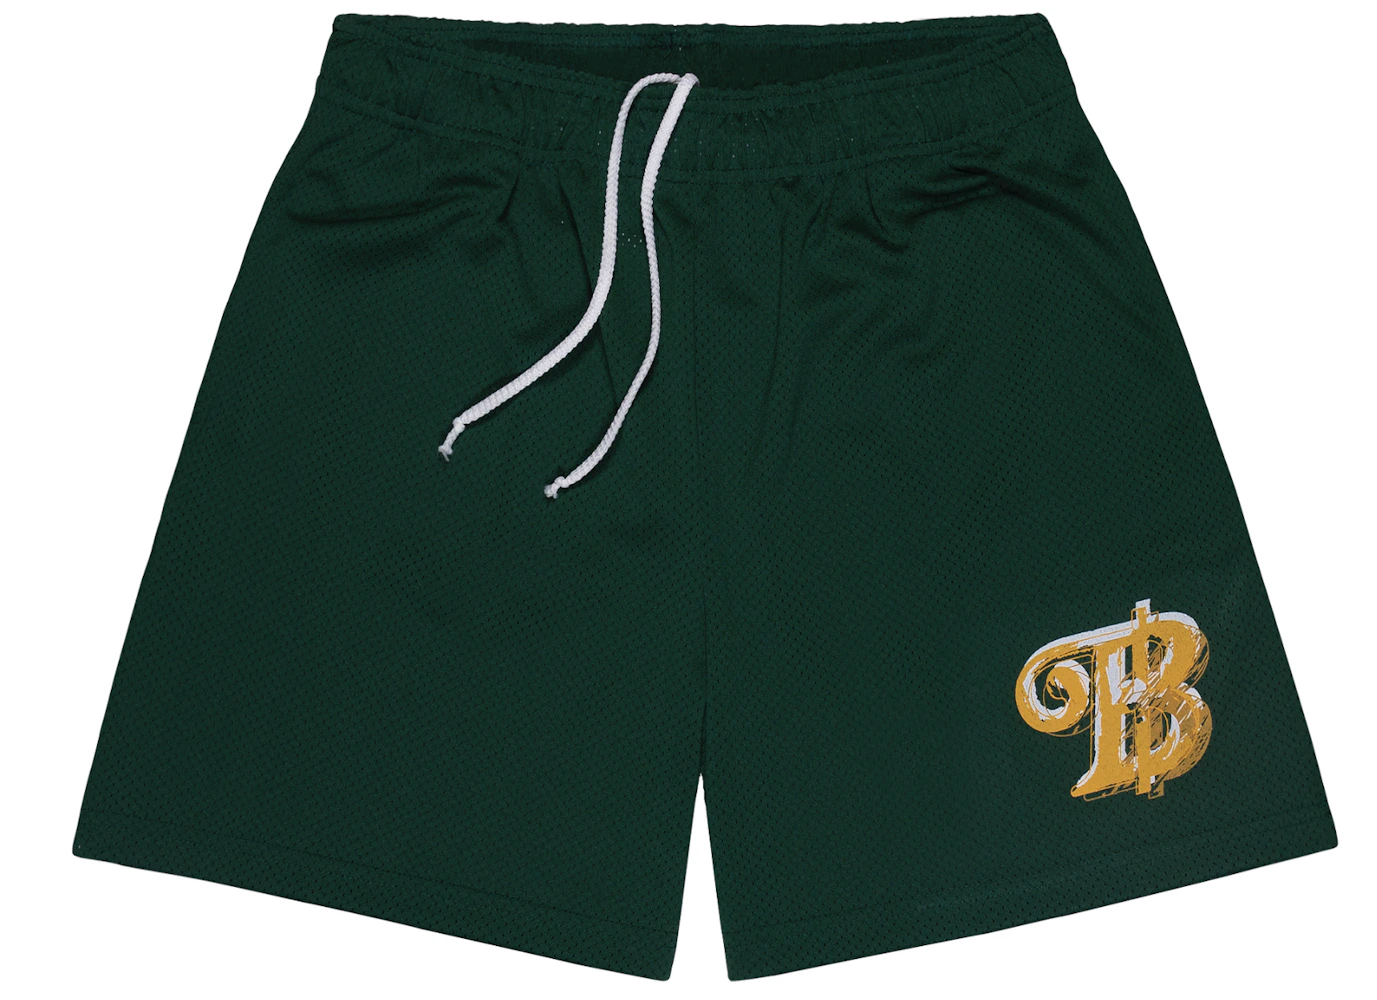 Bravest Studio Shorts (Ben Baller Collab) for Sale in The Bronx, NY -  OfferUp